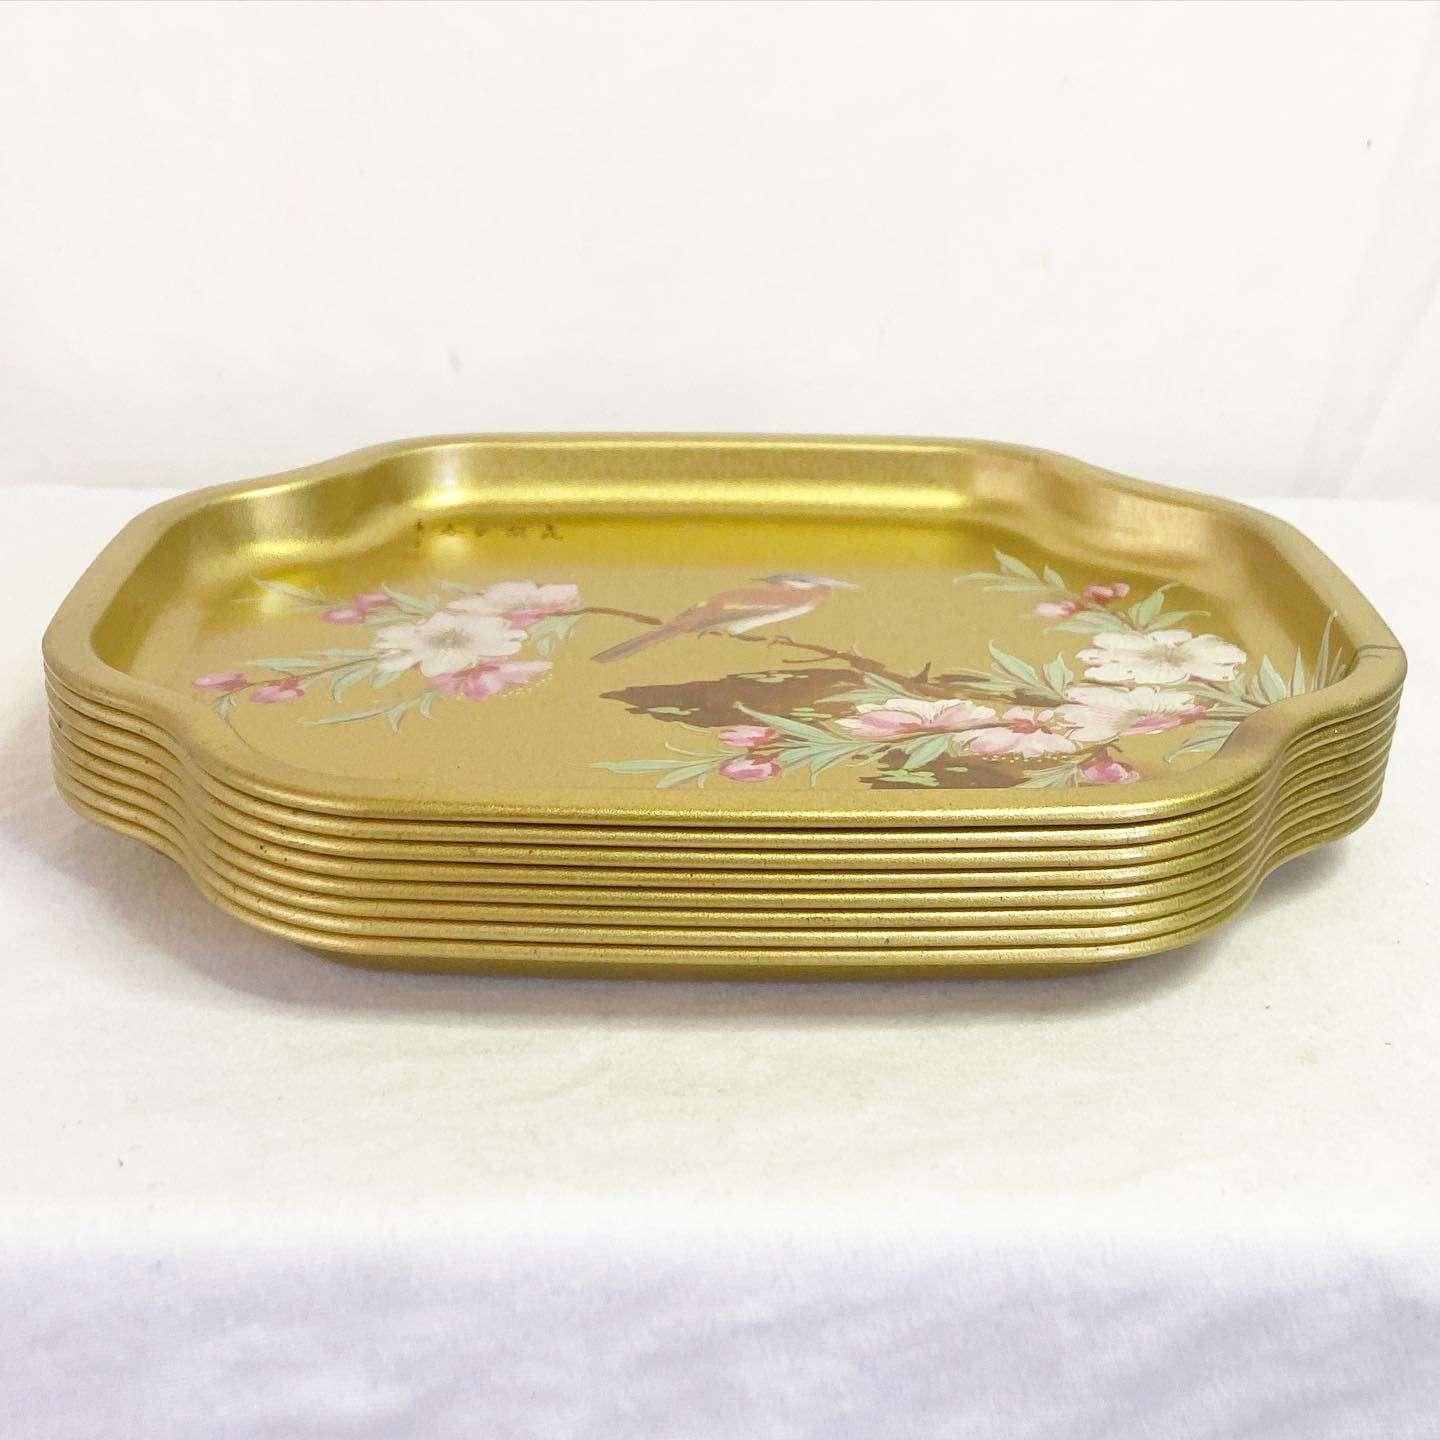 English Vintage Chinoiserie Elite Gold Aviary and Blossoms Trays - 8 Pieces For Sale